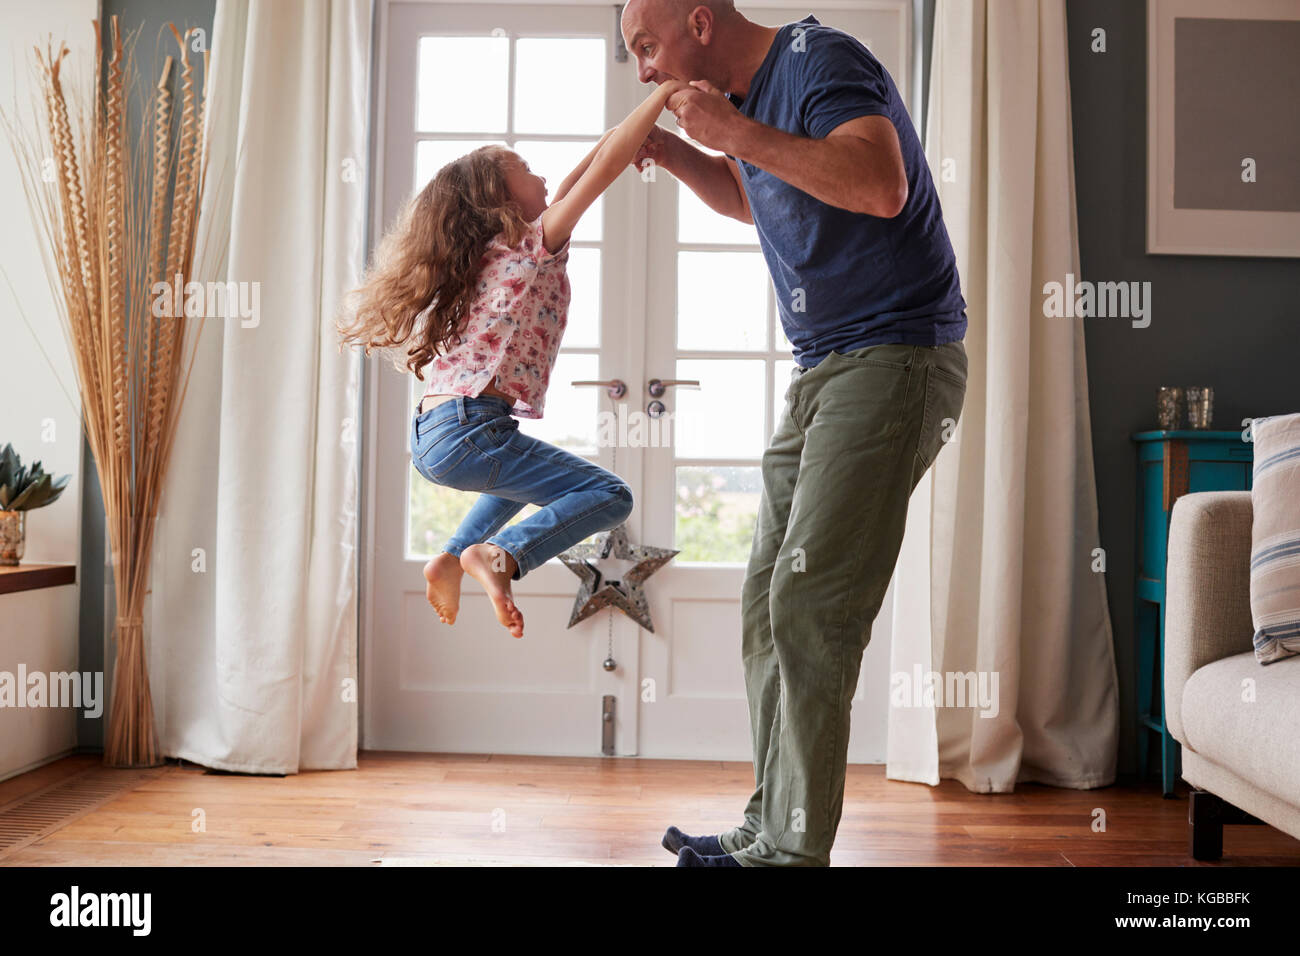 Girl jumping in the air at home holding dad’s hands Stock Photo